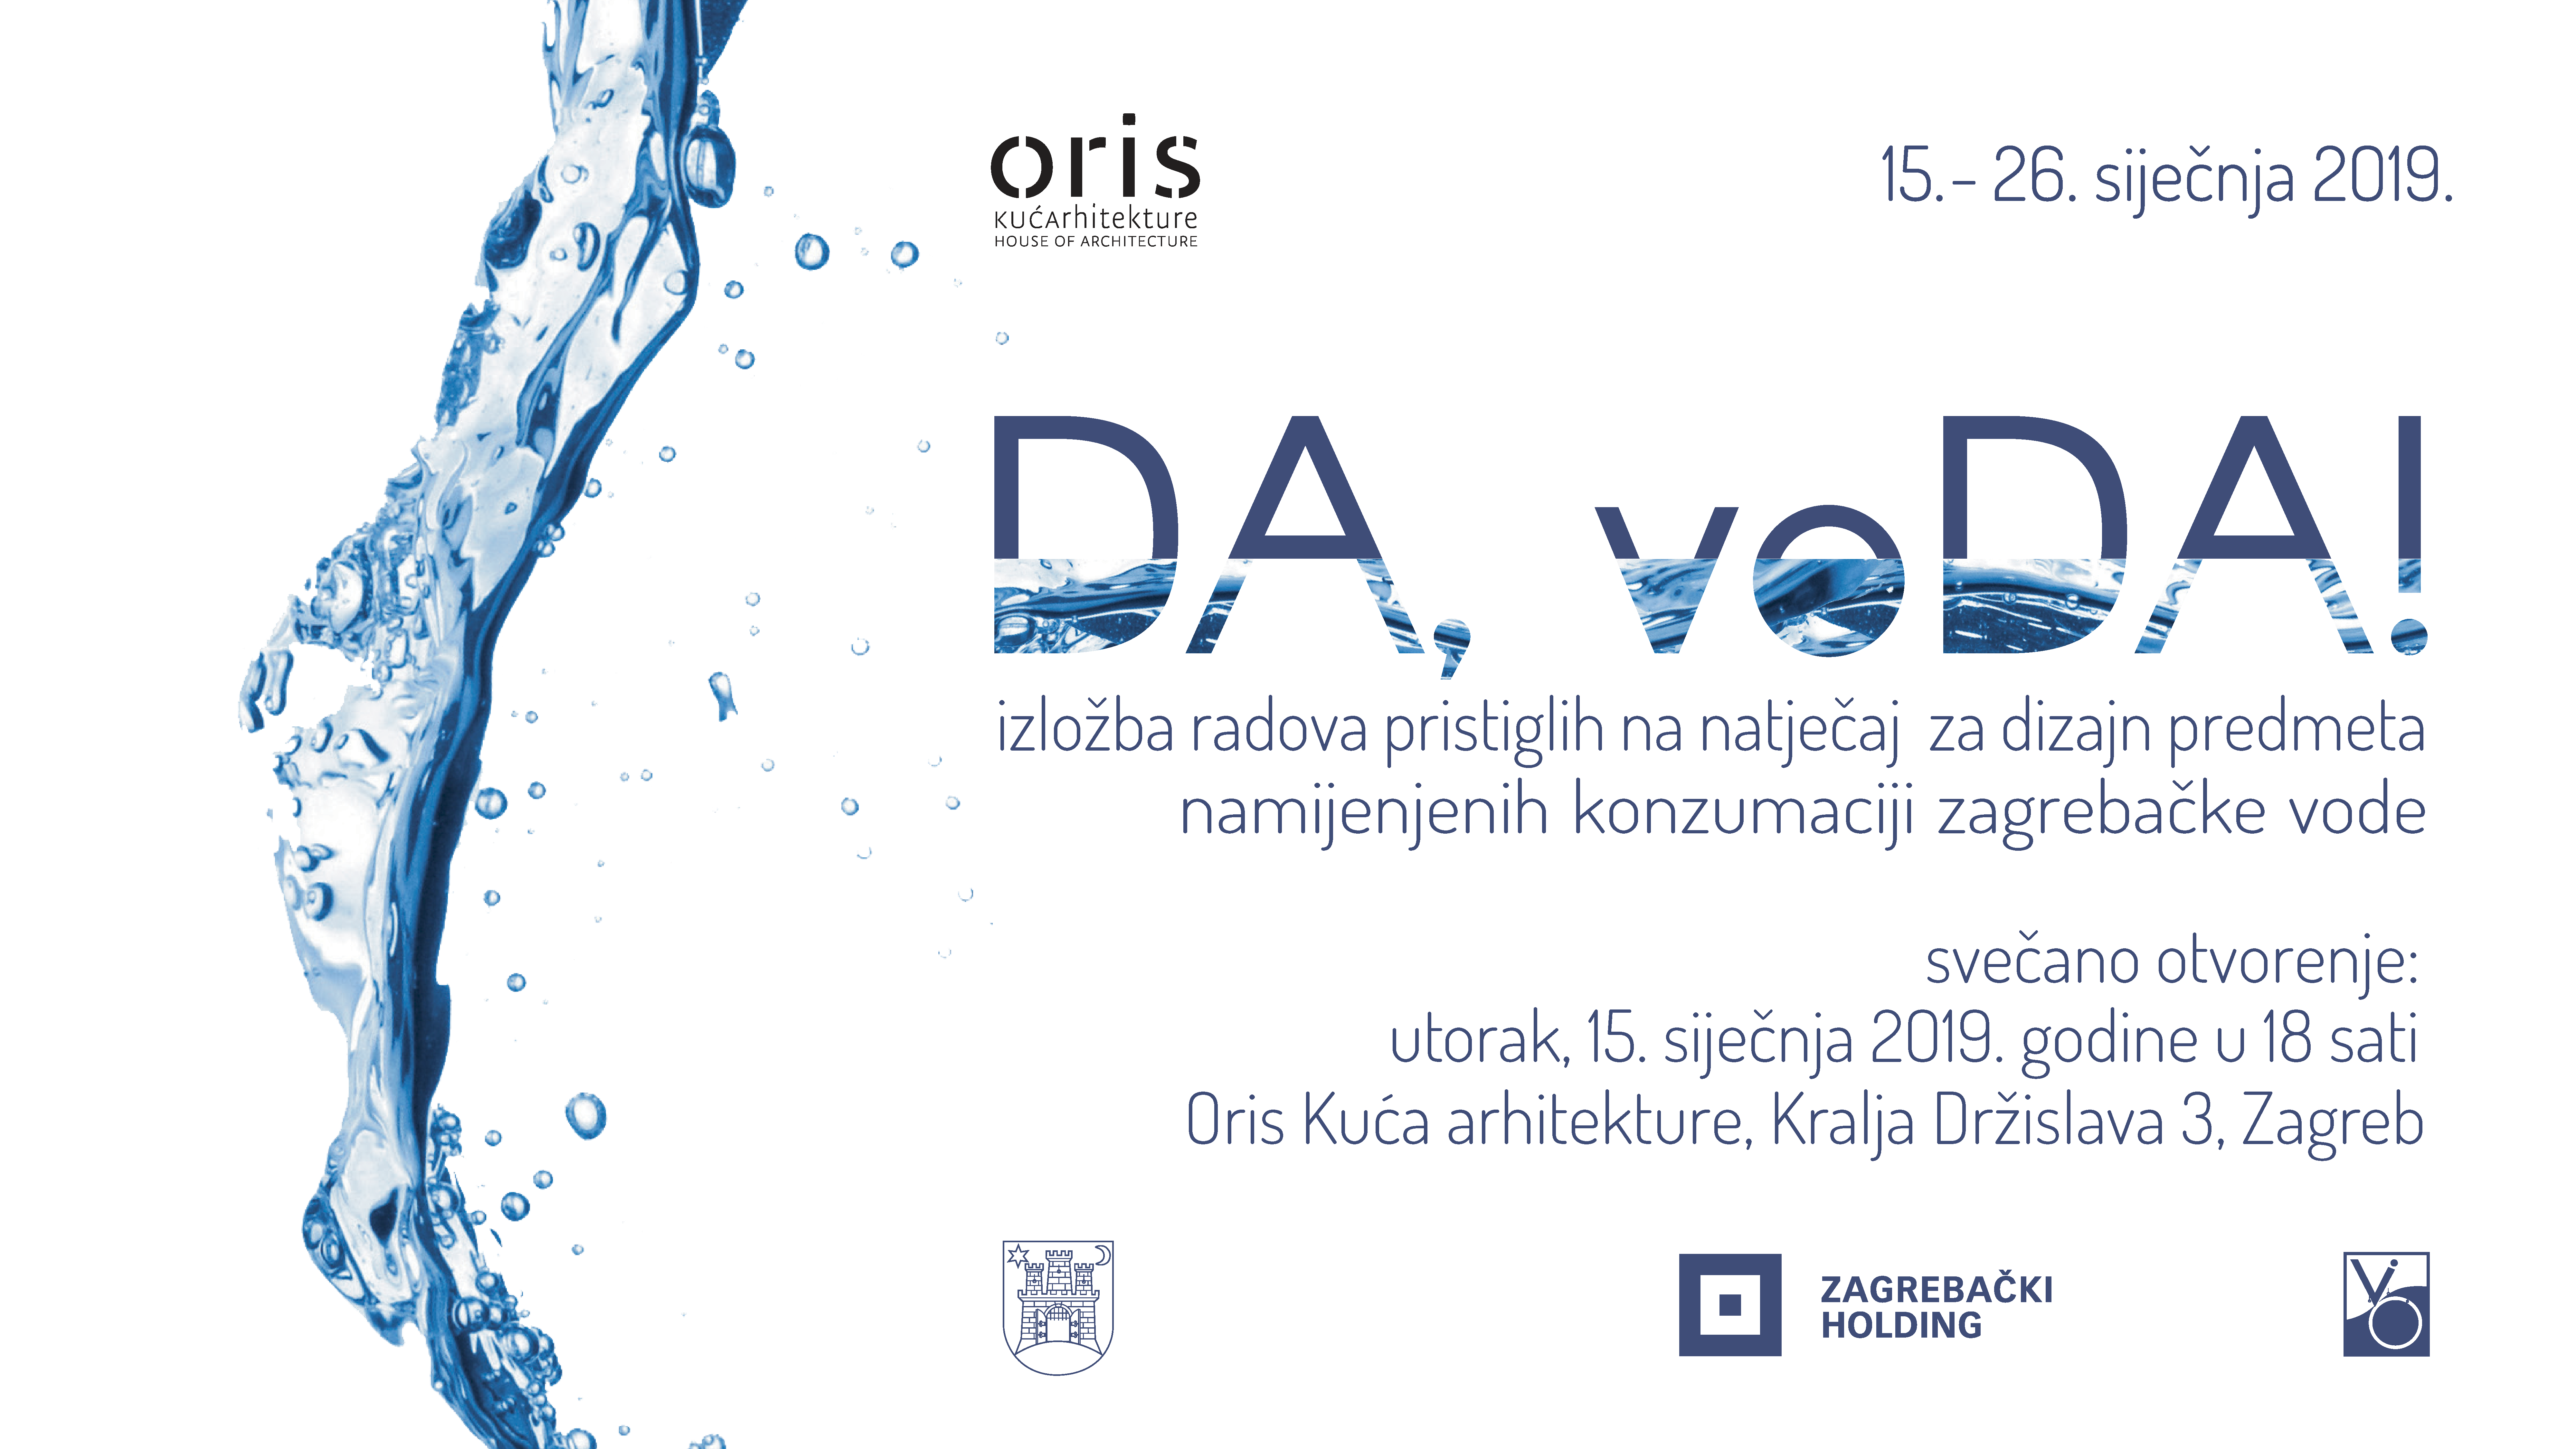 DA, voDA! Exhibition of works submitted to the tender for the design of objects intended for consumption of Zagreb water